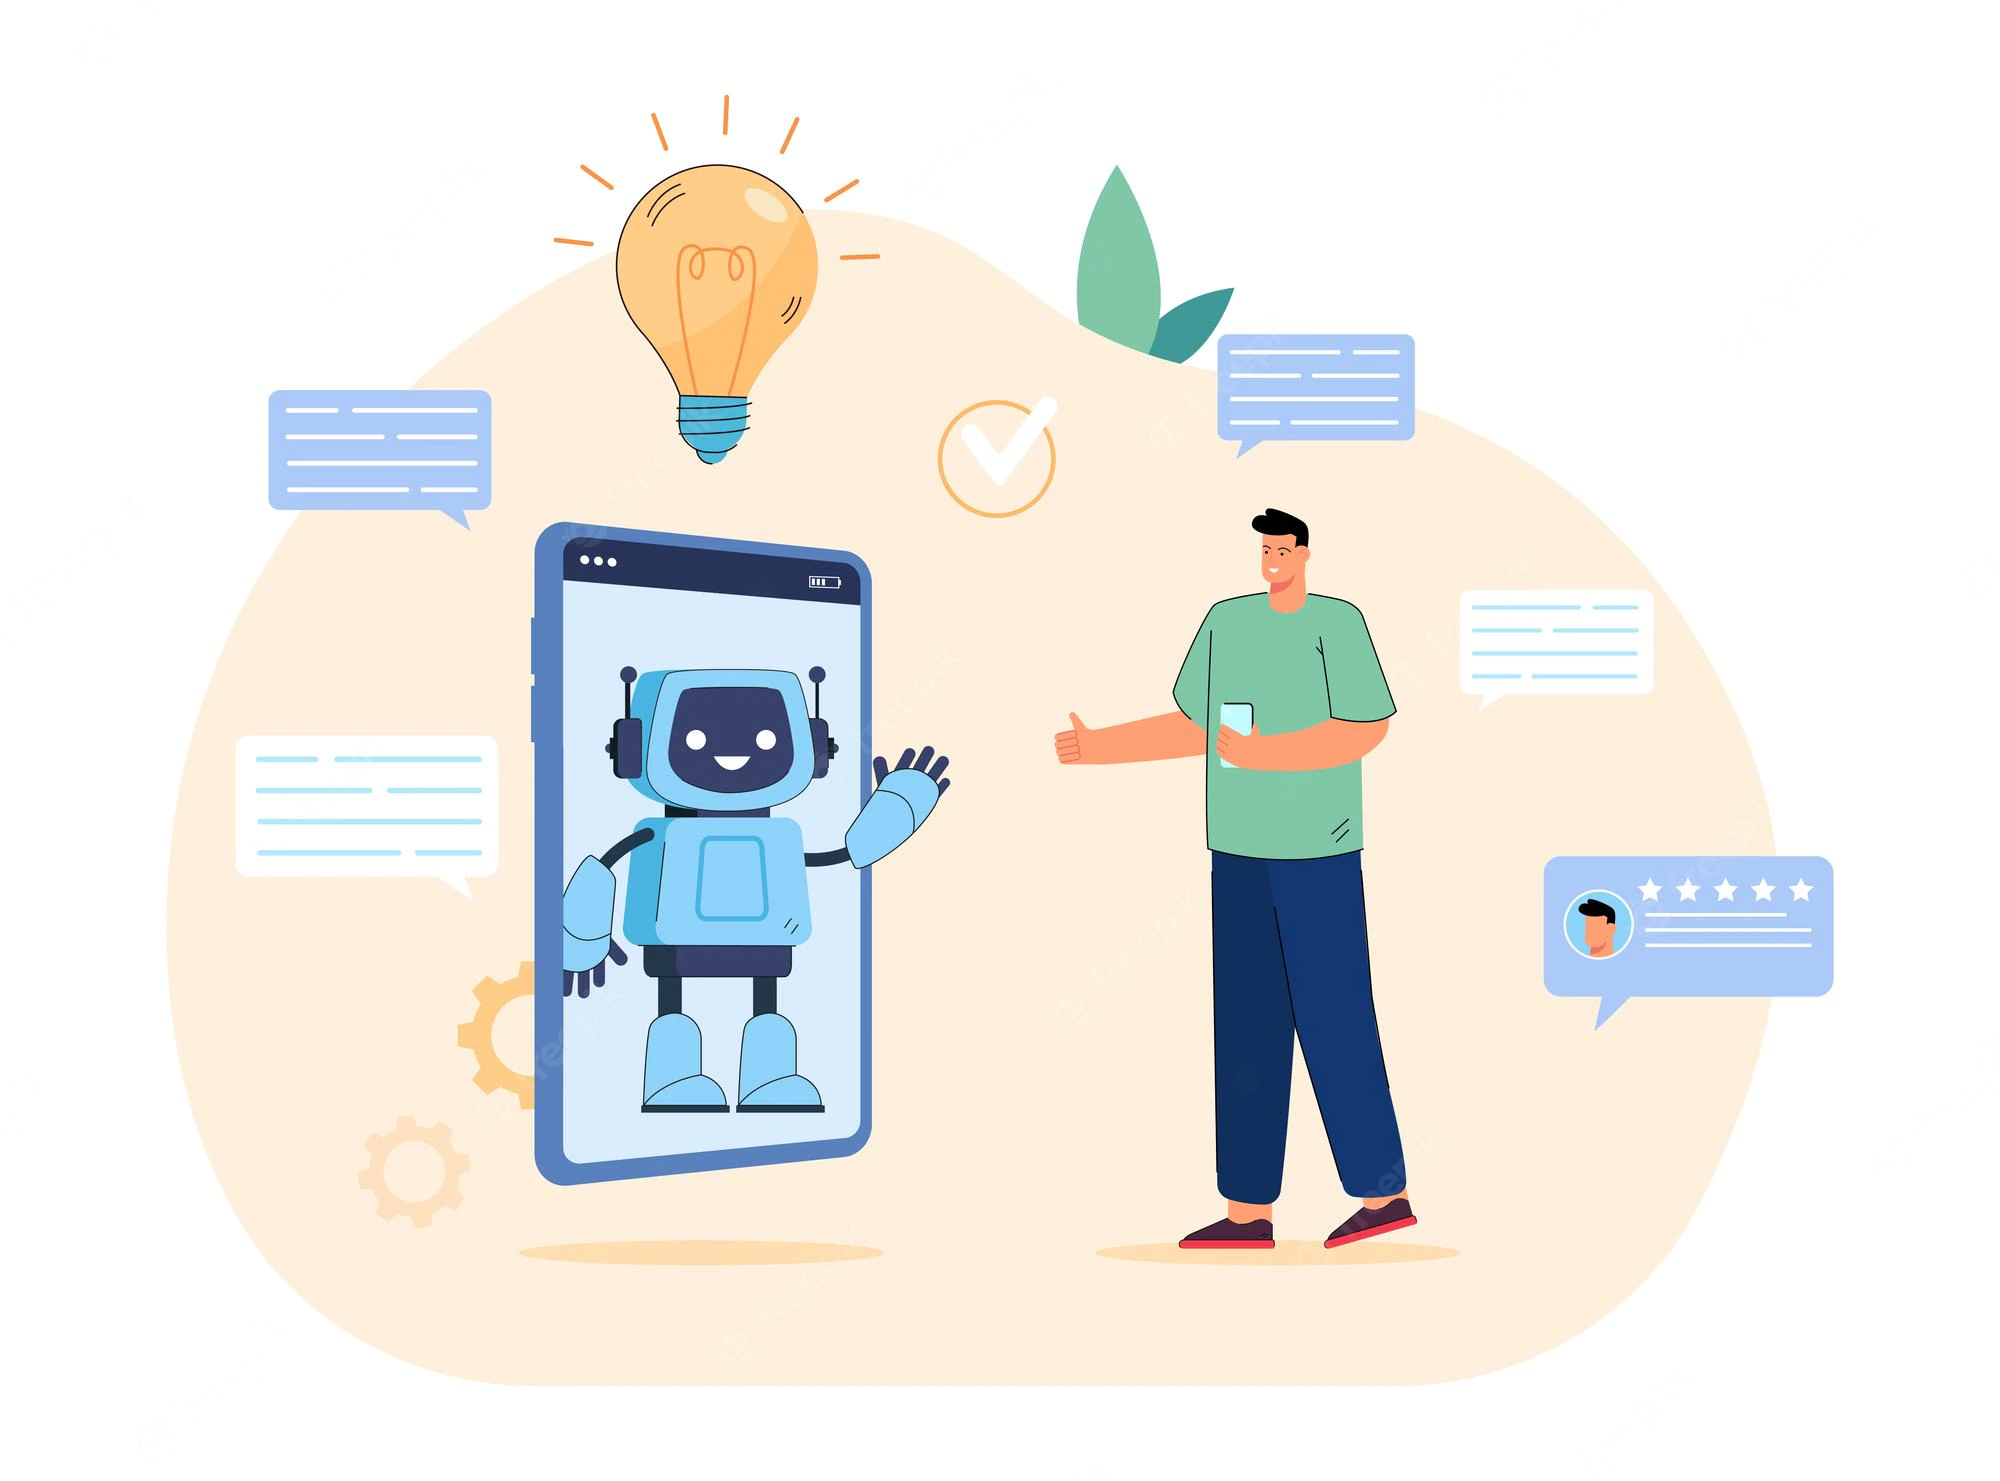 Interact with viewers through AI Facebook Messenger & chatbots